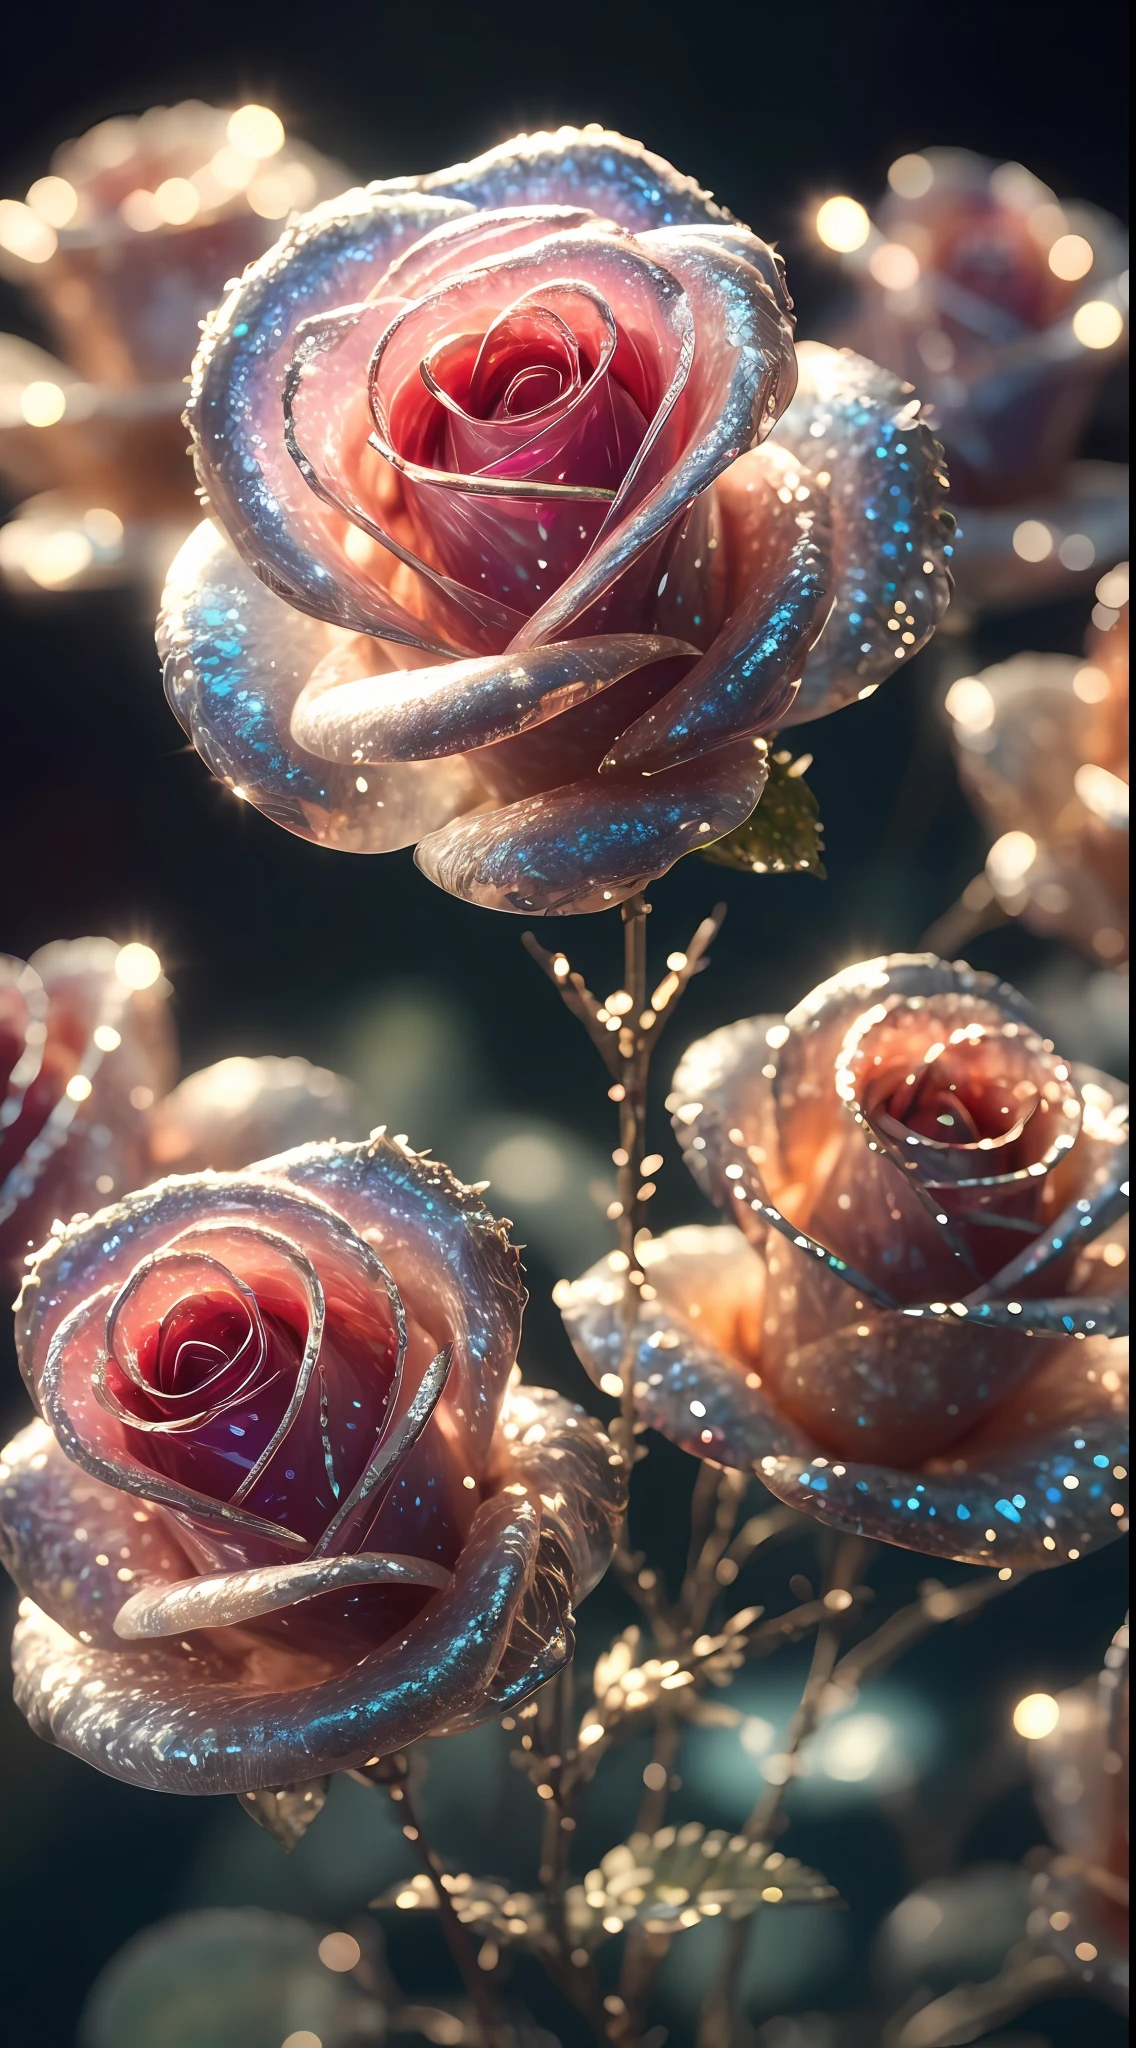 There are many roses that are covered in water droplets - SeaArt AI